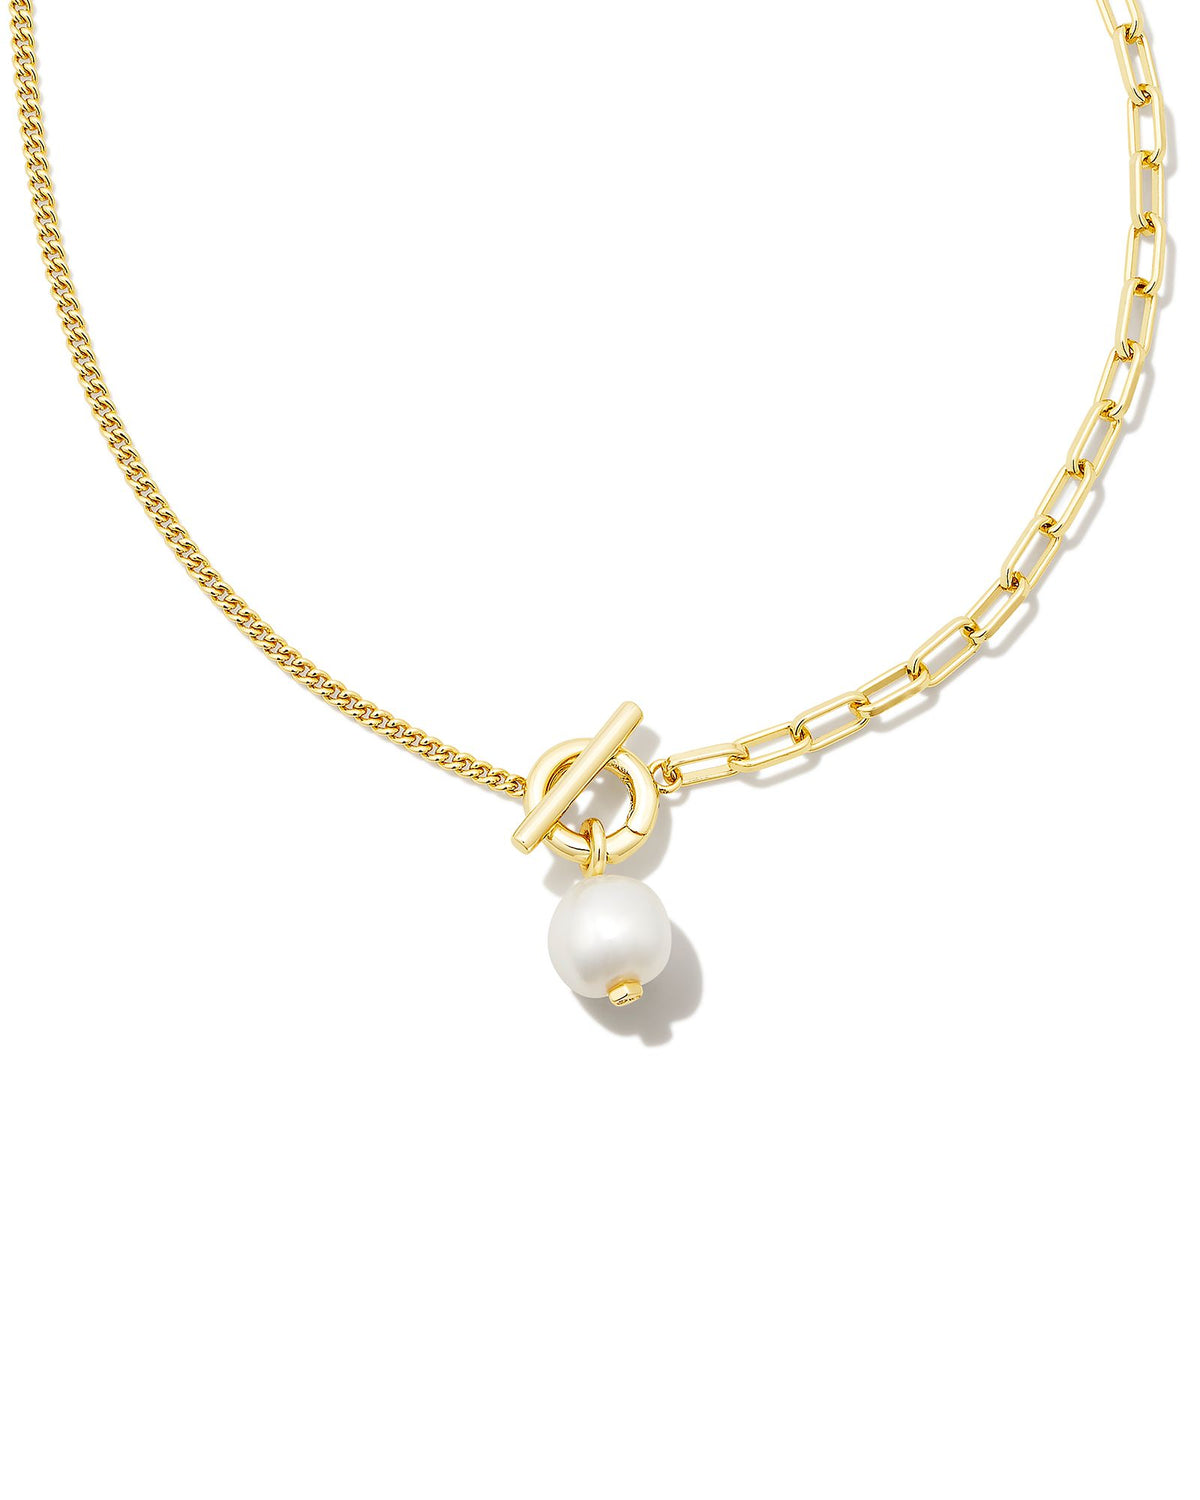 LEIGHTON PEARL CHAIN NECKLACE